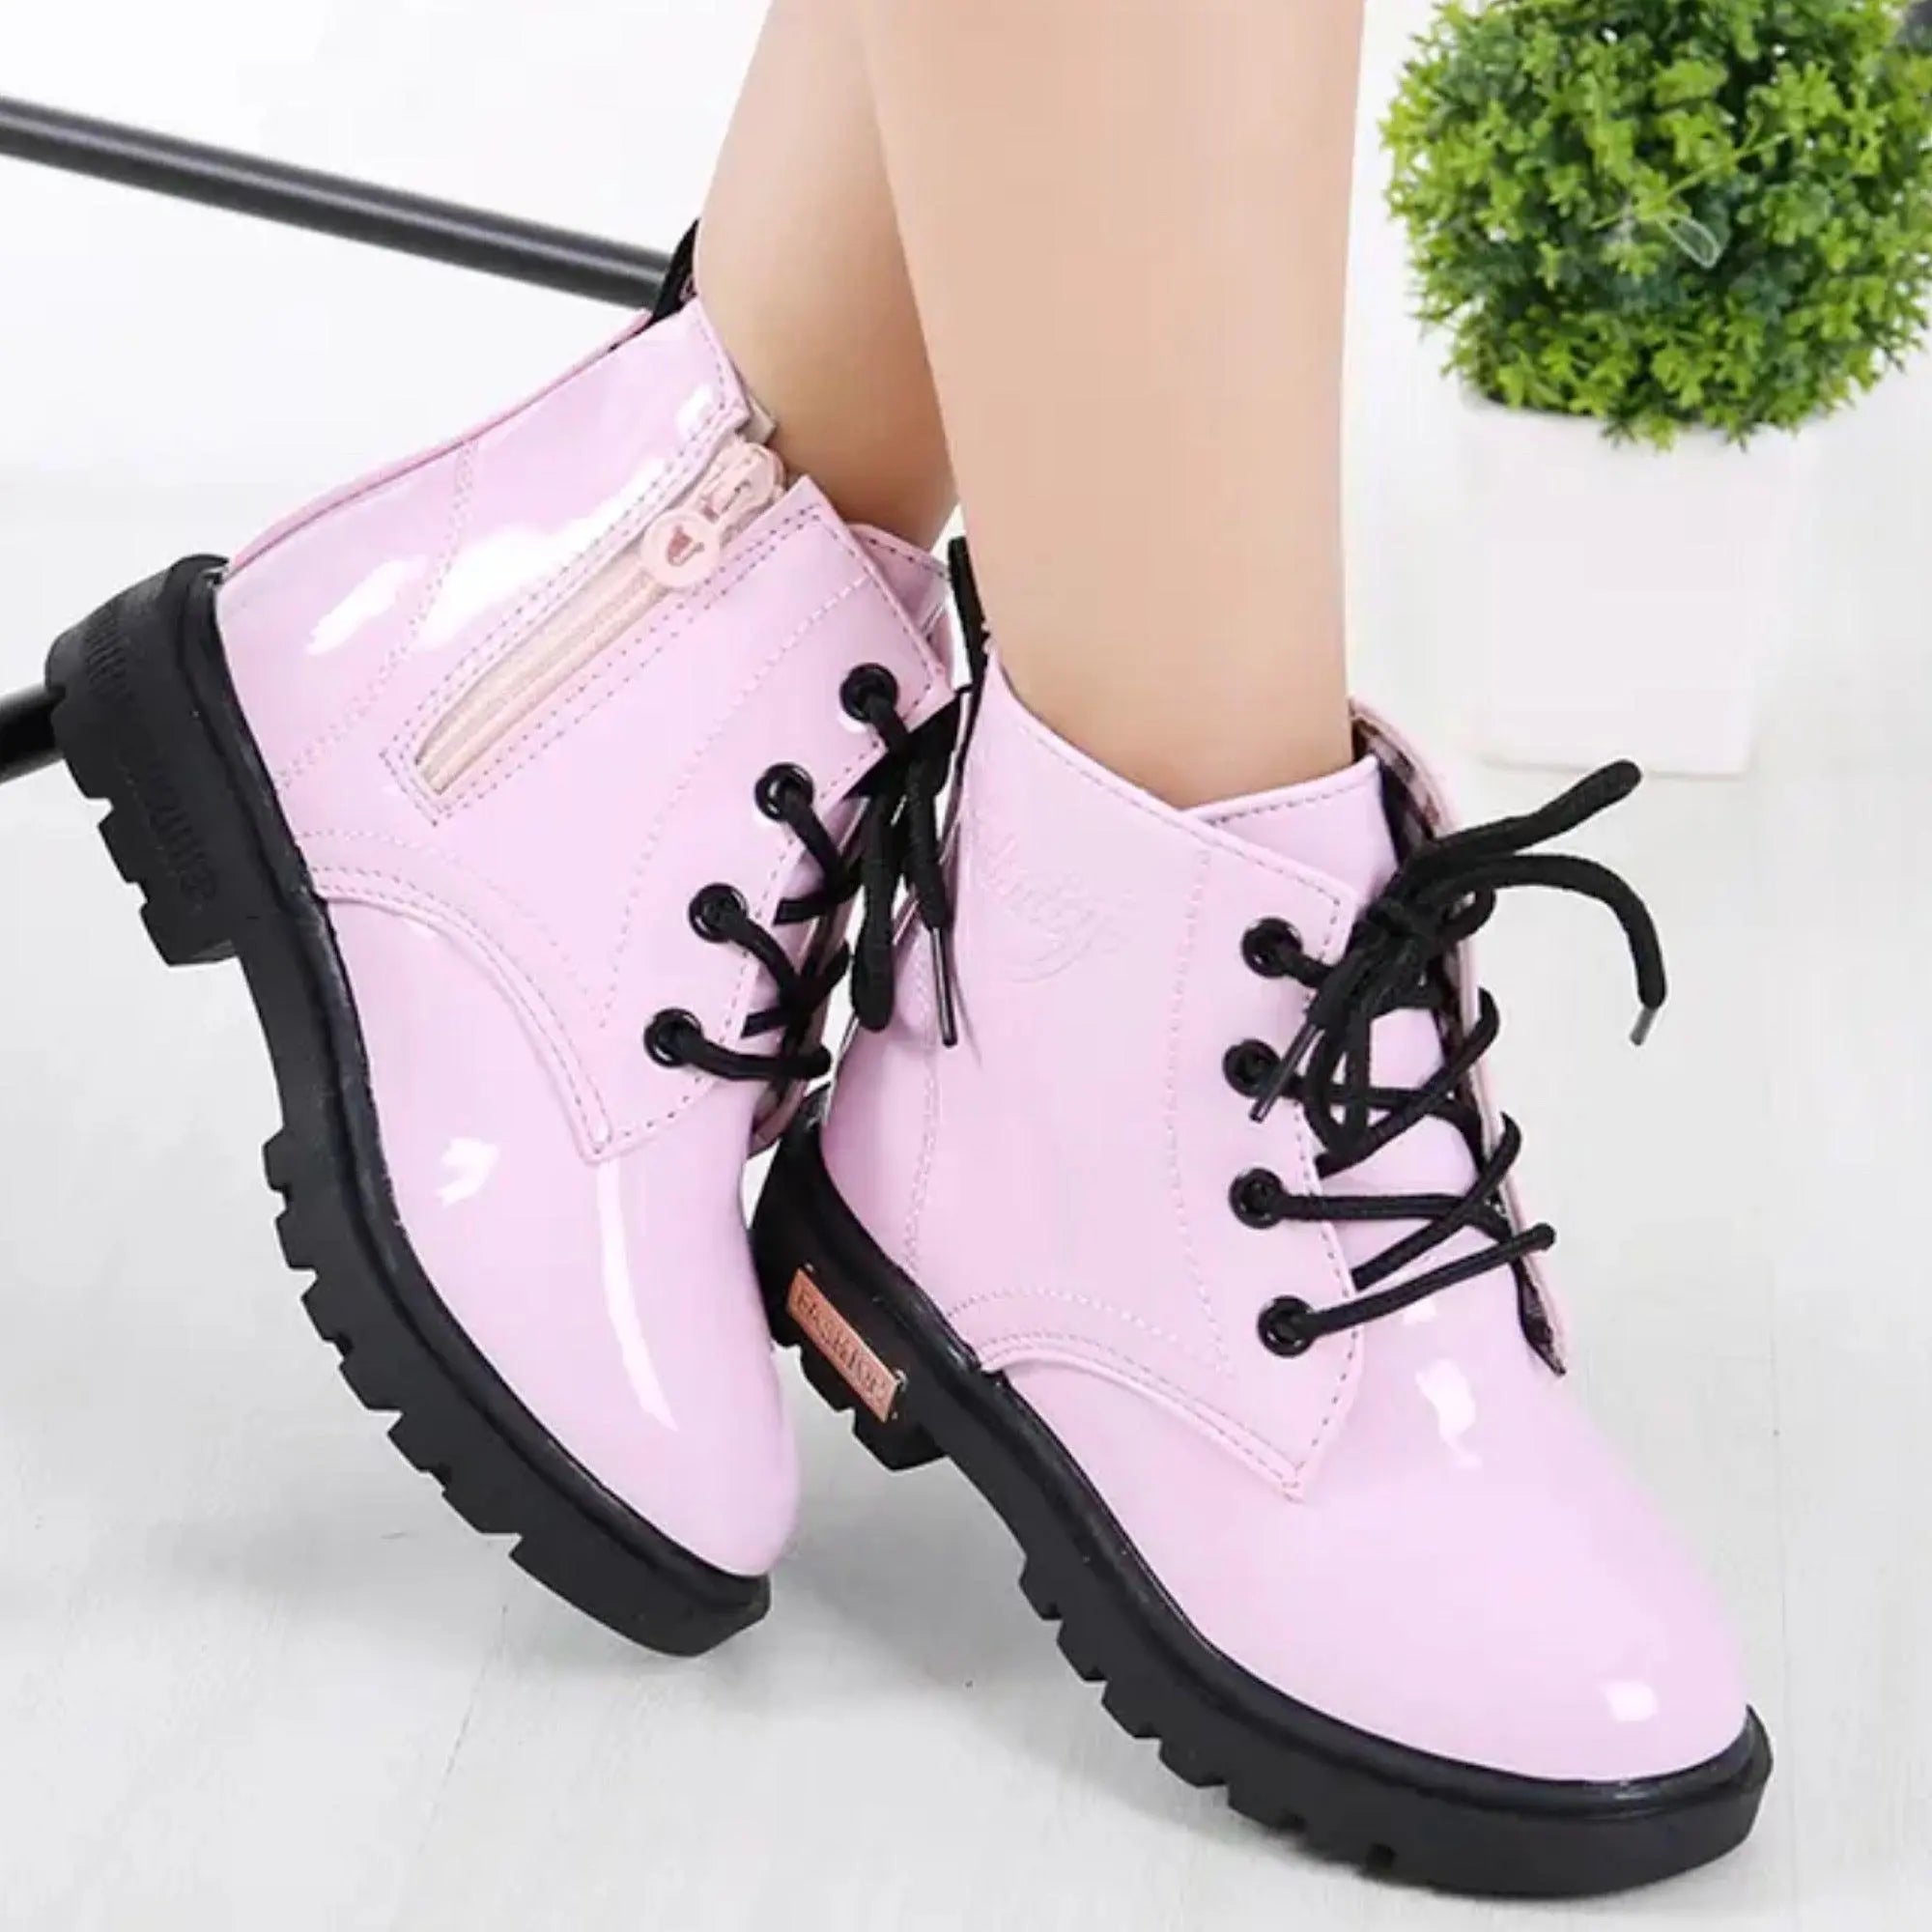 Toddler Girls Lace Up Side Zipper Combat Boots Waterproof Fashion